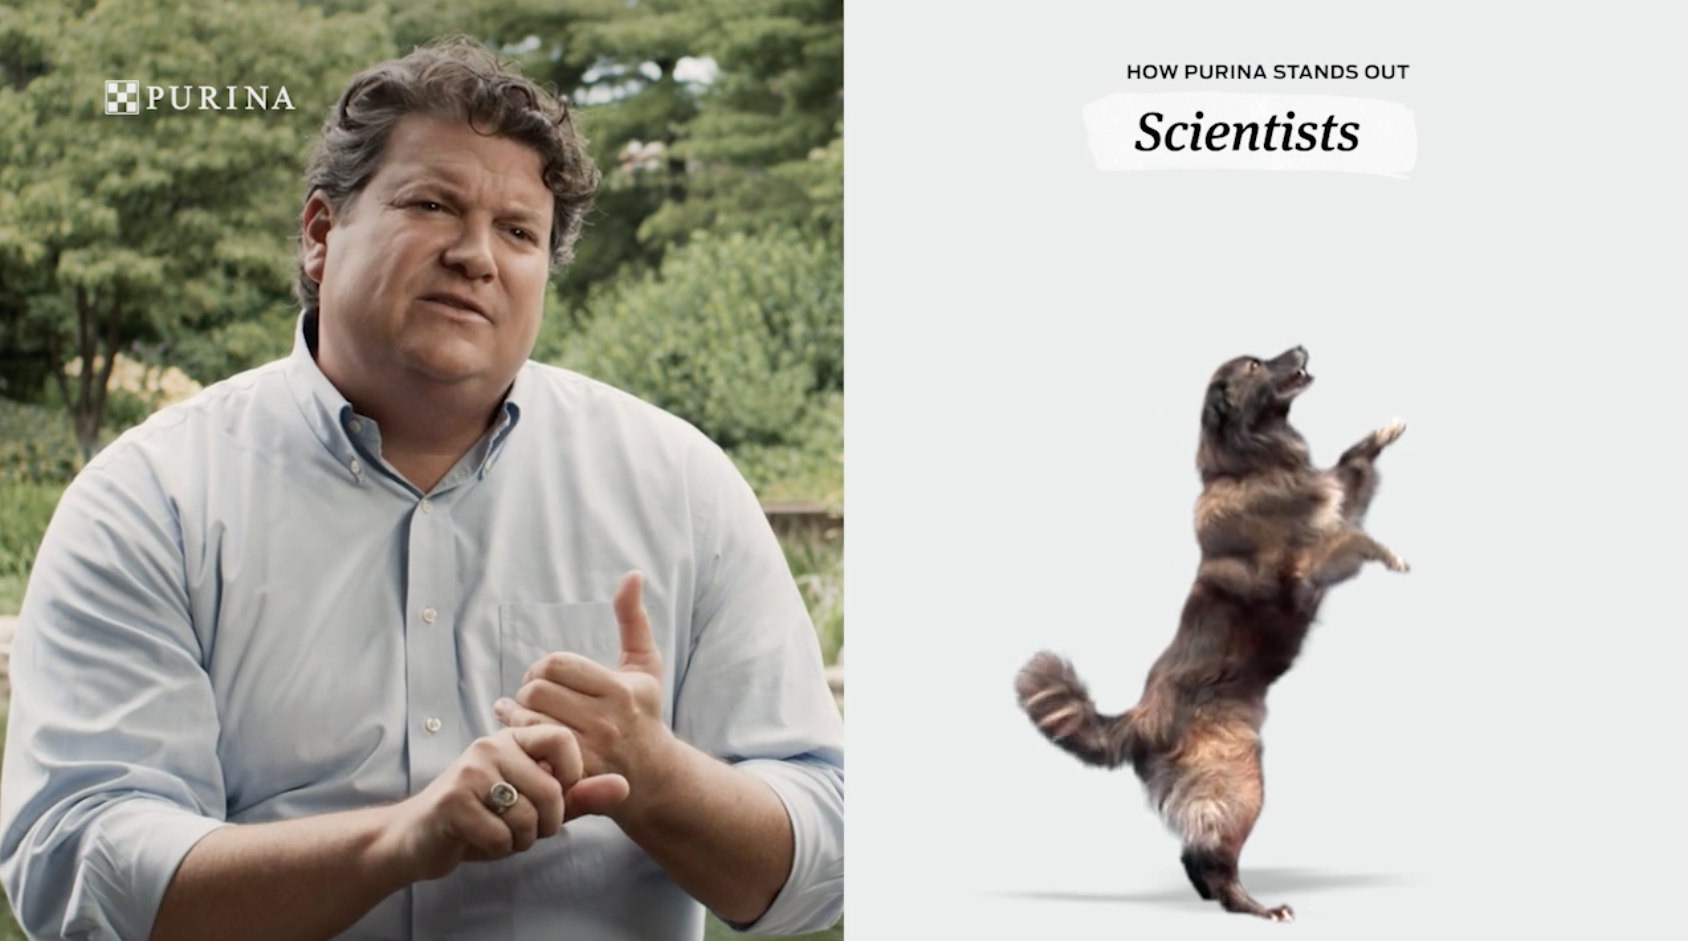 Expert Visual Storytelling Ad for Engaging Purina Video | Pluto